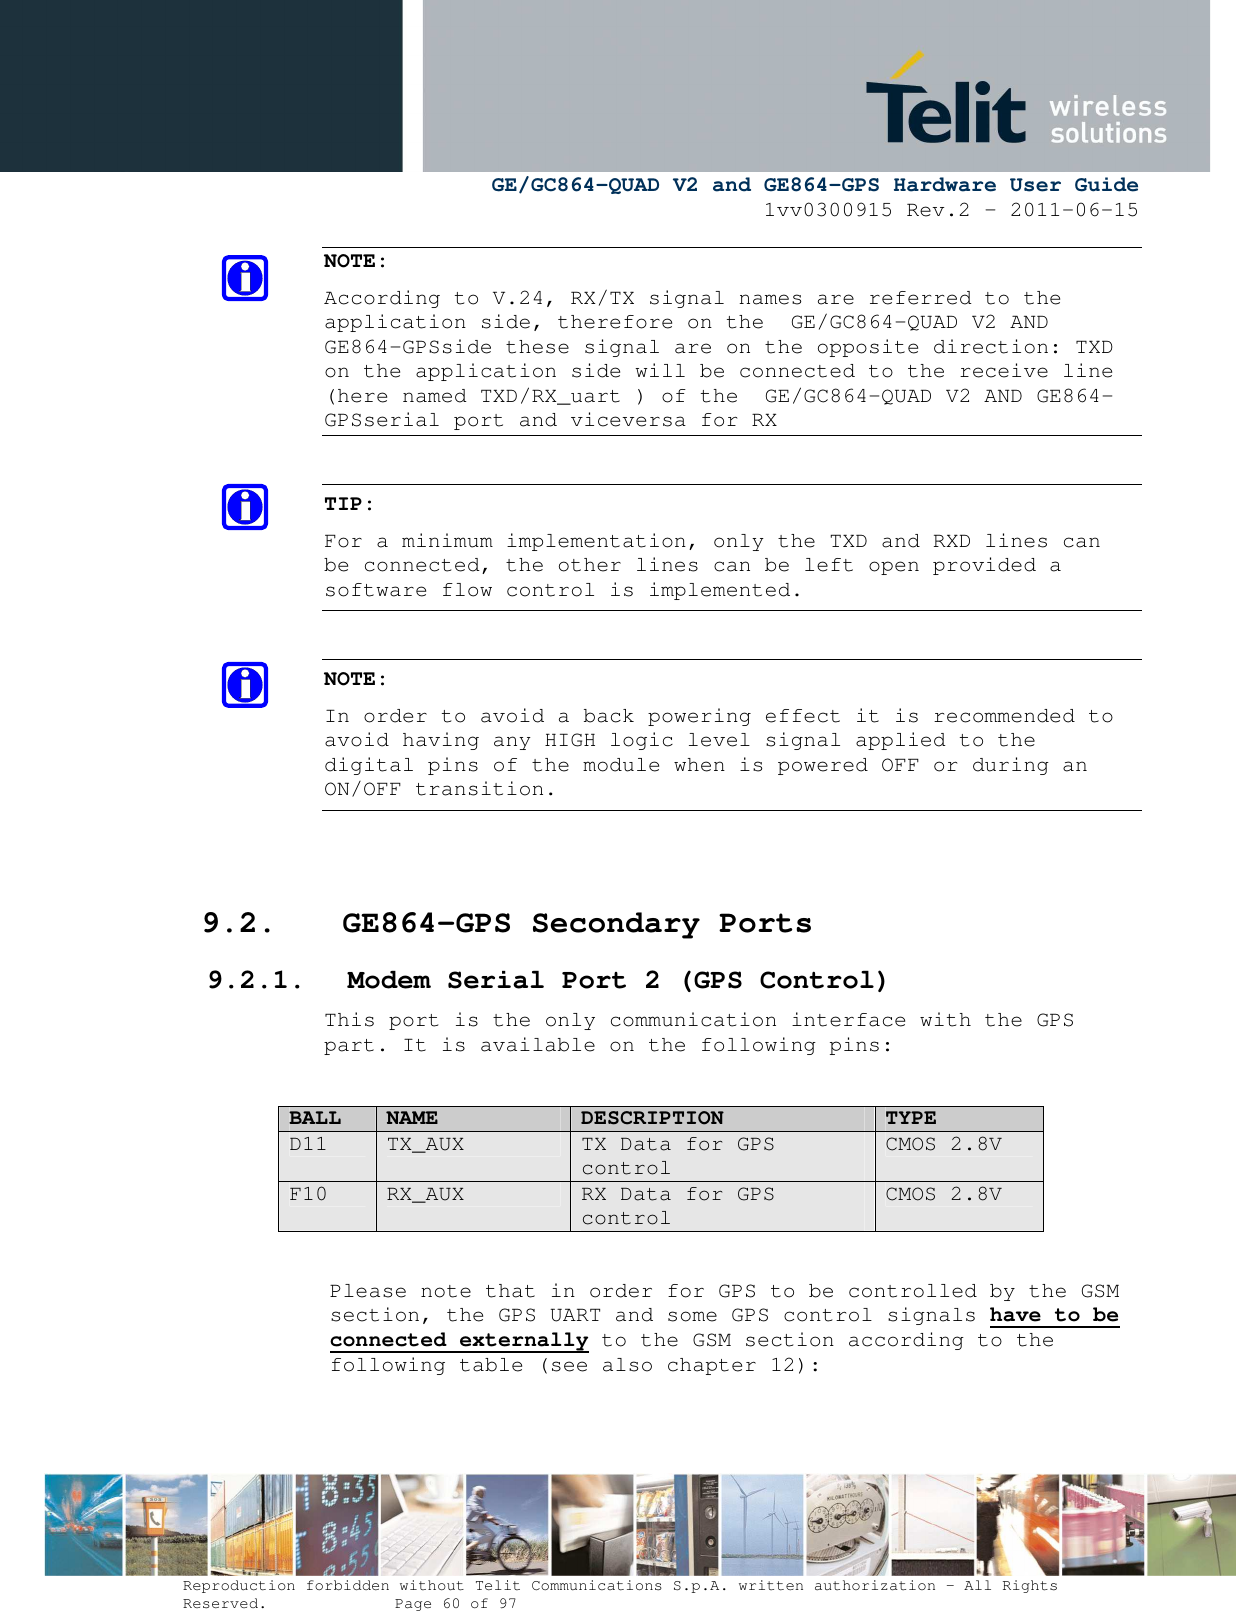      GE/GC864-QUAD V2 and GE864-GPS Hardware User Guide 1vv0300915 Rev.2 – 2011-06-15  Reproduction forbidden without Telit Communications S.p.A. written authorization - All Rights Reserved.    Page 60 of 97  NOTE:  According to V.24, RX/TX signal names are referred to the application side, therefore on the  GE/GC864-QUAD V2 AND GE864-GPSside these signal are on the opposite direction: TXD on the application side will be connected to the receive line (here named TXD/RX_uart ) of the  GE/GC864-QUAD V2 AND GE864-GPSserial port and viceversa for RX  TIP: For a minimum implementation, only the TXD and RXD lines can be connected, the other lines can be left open provided a software flow control is implemented.  NOTE: In order to avoid a back powering effect it is recommended to avoid having any HIGH logic level signal applied to the digital pins of the module when is powered OFF or during an ON/OFF transition.   9.2. GE864-GPS Secondary Ports 9.2.1. Modem Serial Port 2 (GPS Control) This port is the only communication interface with the GPS part. It is available on the following pins:  BALL NAME DESCRIPTION TYPE D11  TX_AUX  TX Data for GPS control CMOS 2.8V F10  RX_AUX  RX Data for GPS control CMOS 2.8V  Please note that in order for GPS to be controlled by the GSM section, the GPS UART and some GPS control signals have to be connected externally to the GSM section according to the following table (see also chapter 12):  